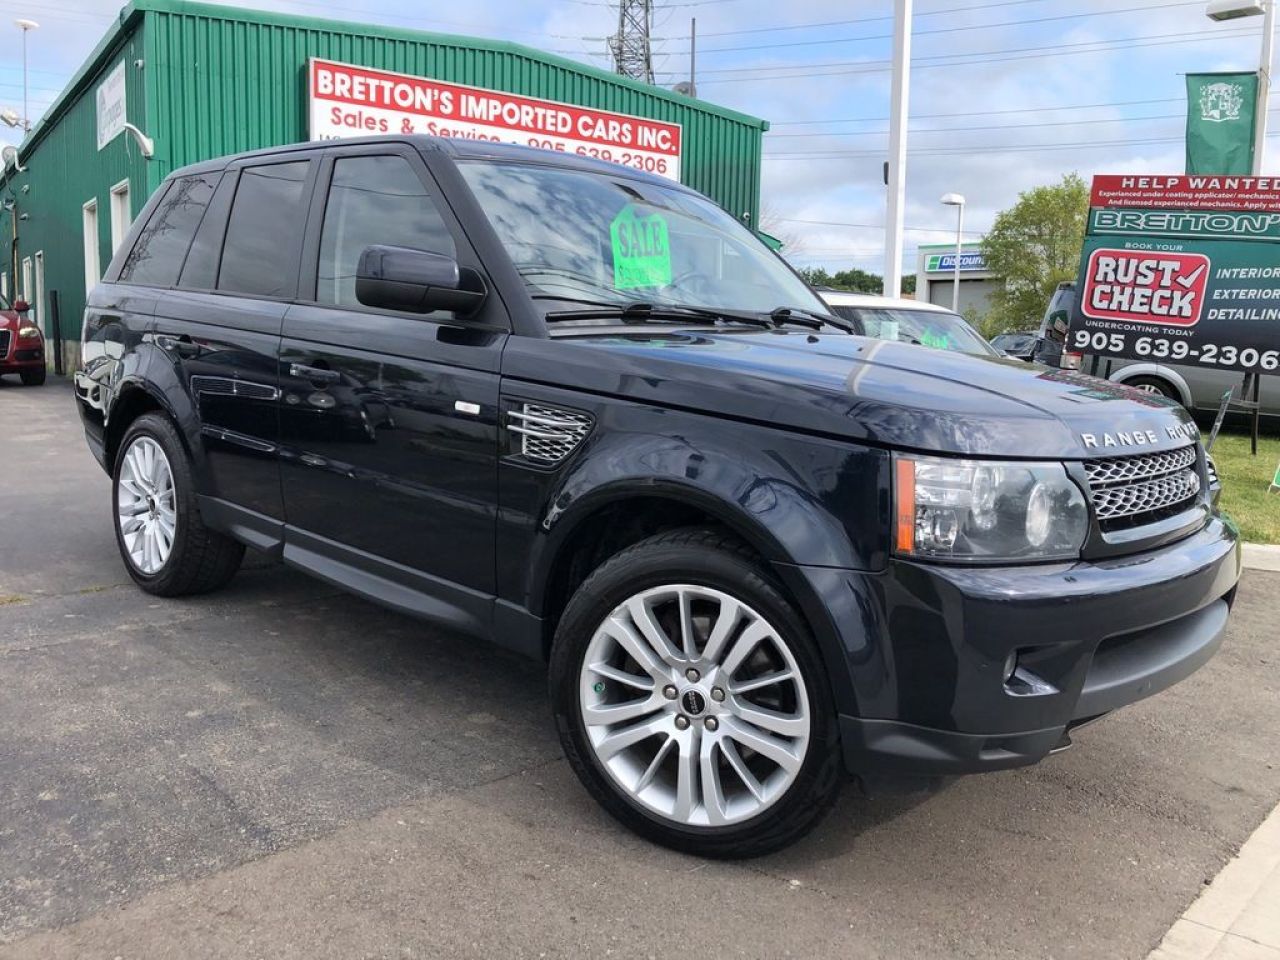 2012 Land Rover Range Rover Sport Bretton S Imported Cars Inc